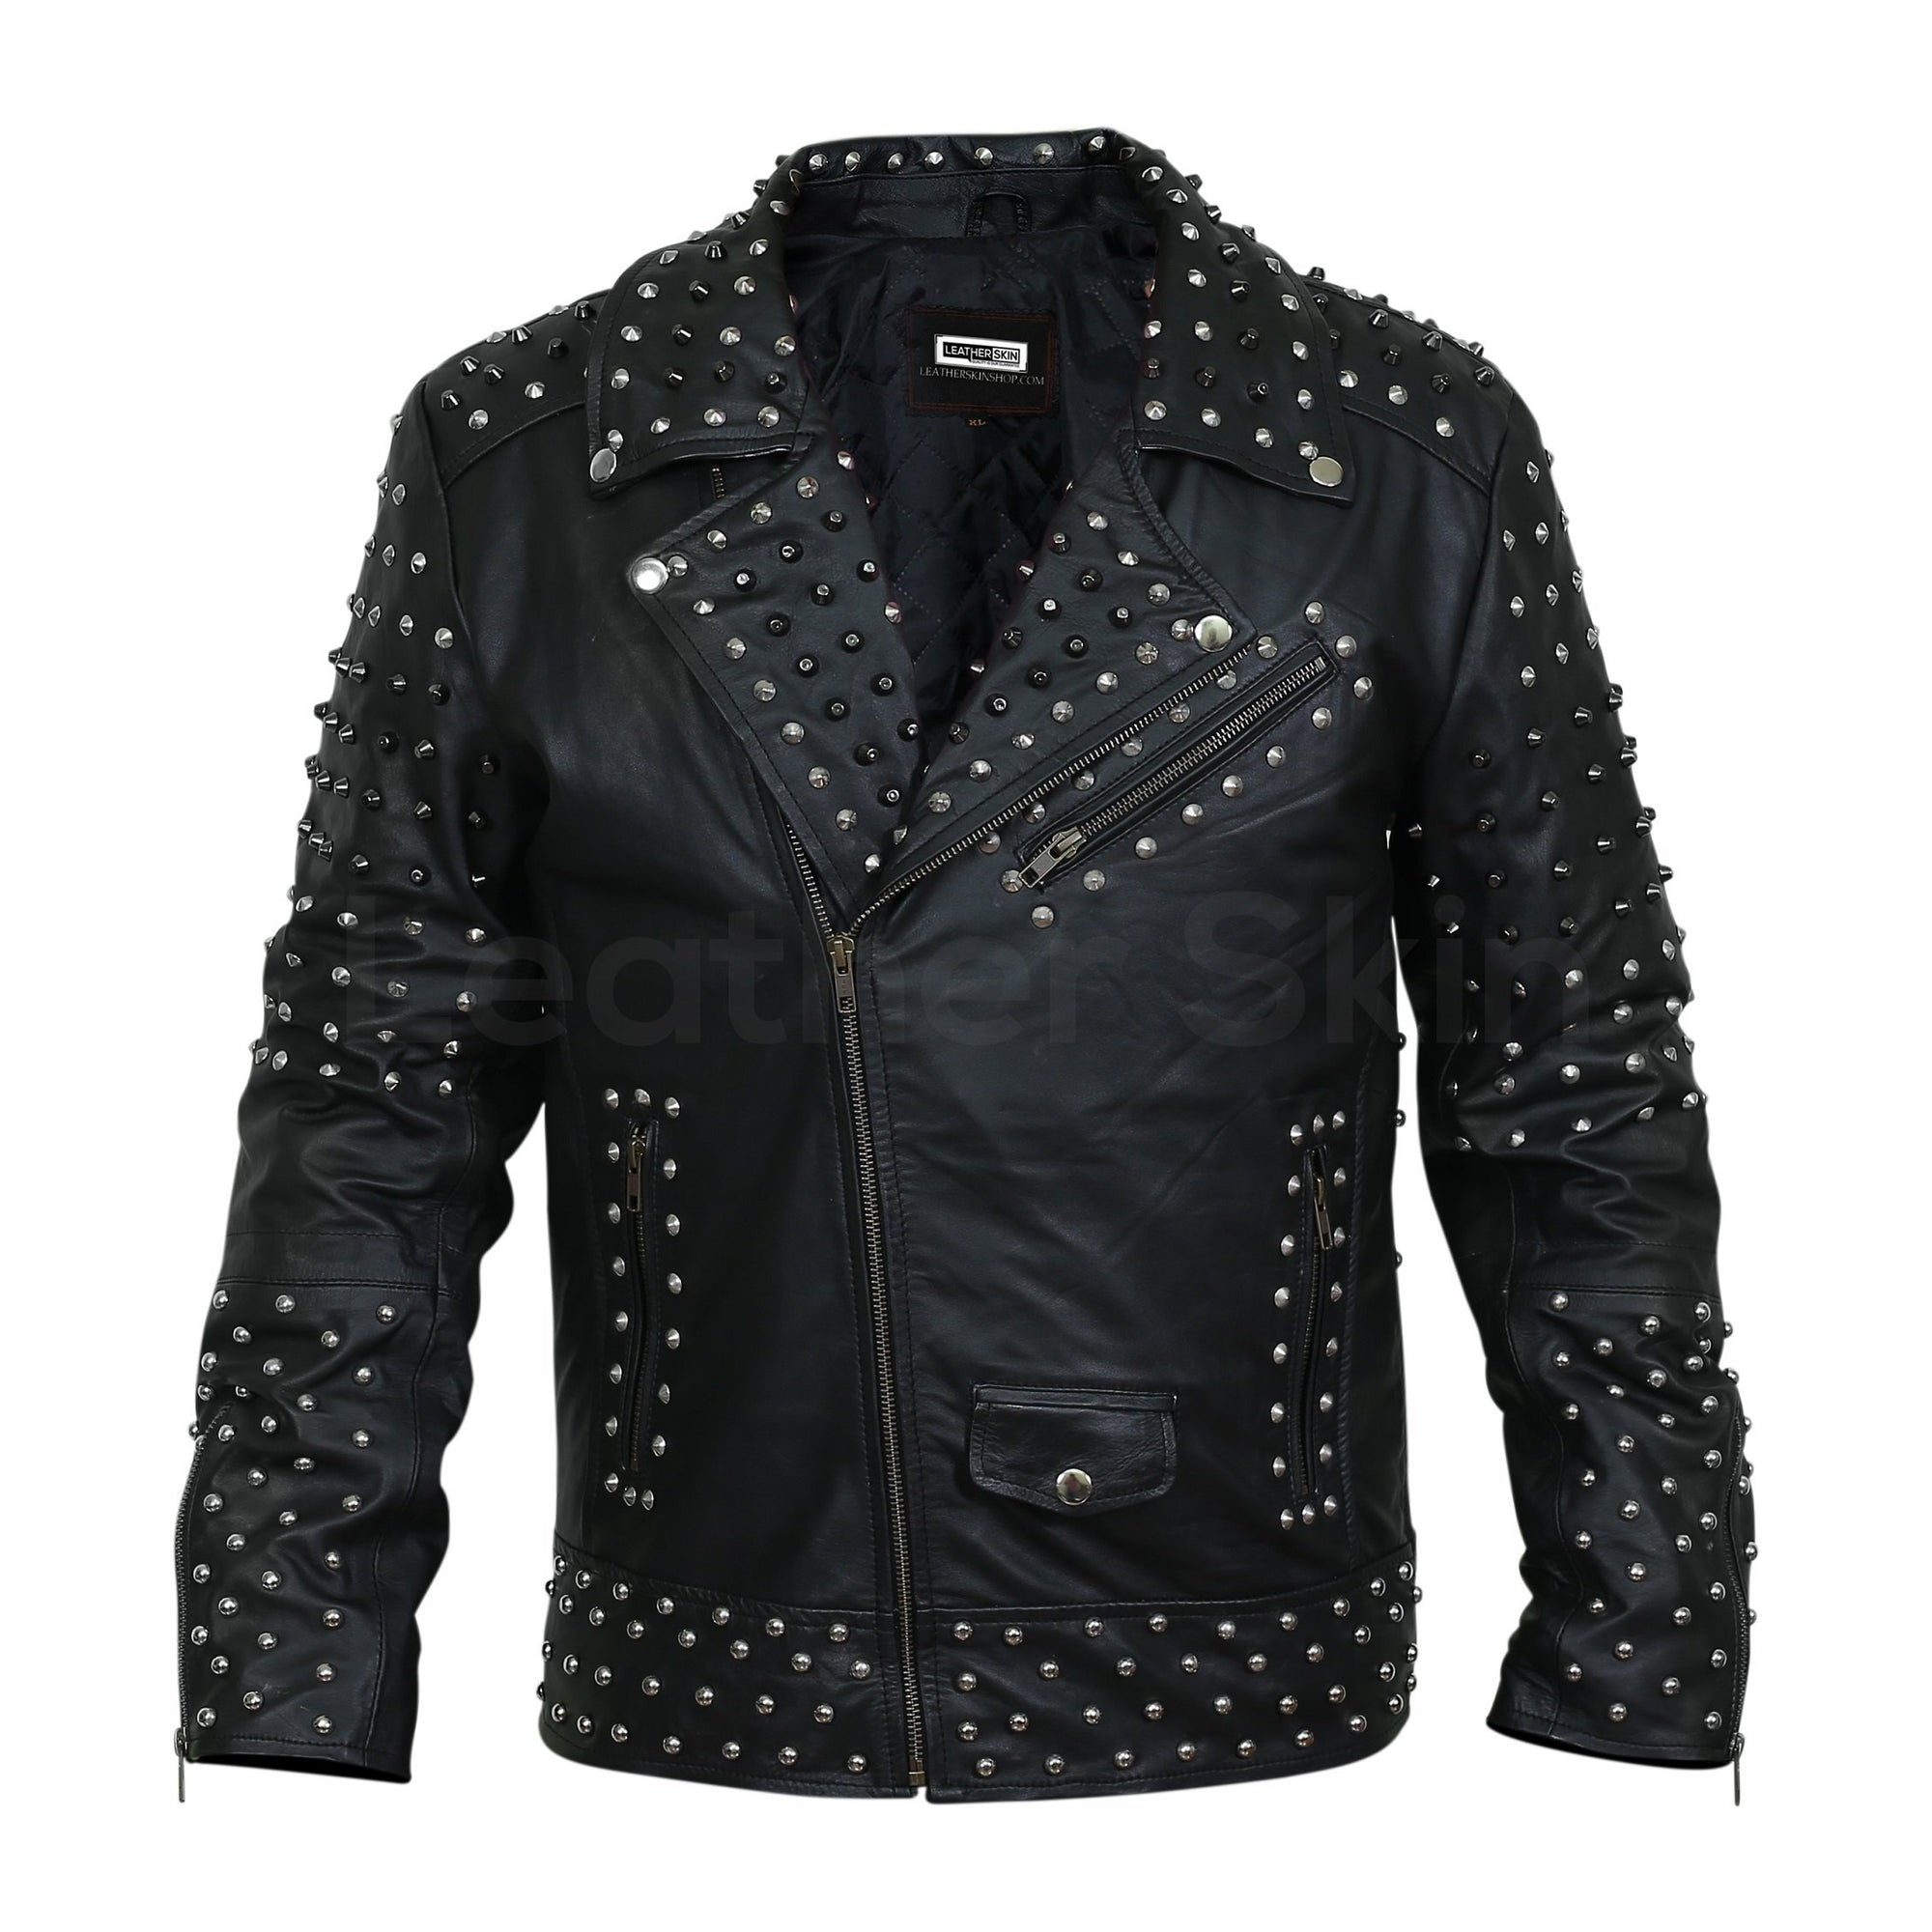 spiked leather jacket mens